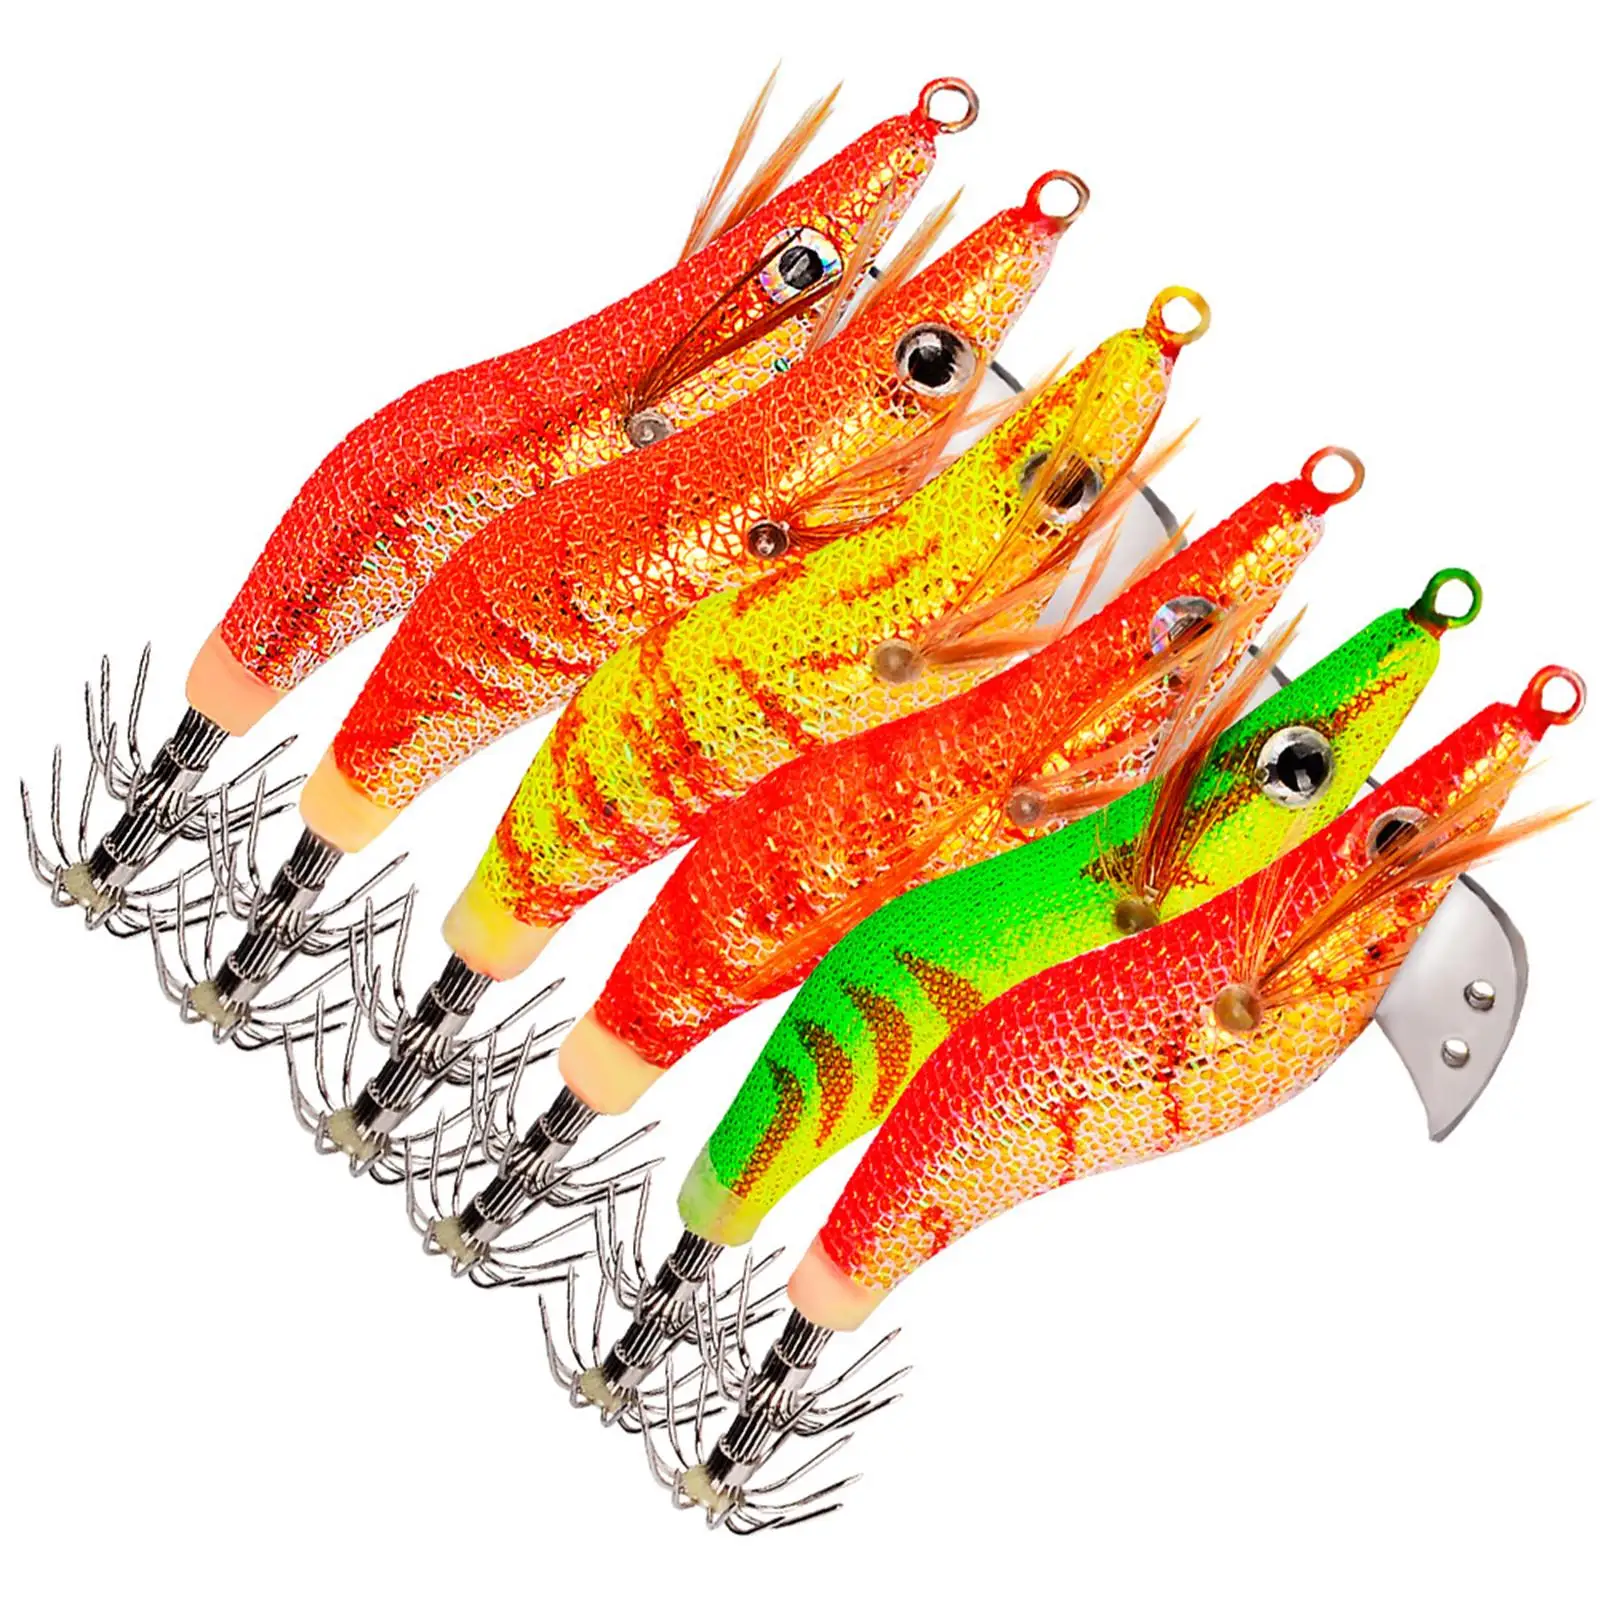 6 Pieces Squid Jig Hook Hard Fishing Lures Prawn Lures for Octopus Freshwater Fishing Sea Fishing Squid Fishing Cuttlefish